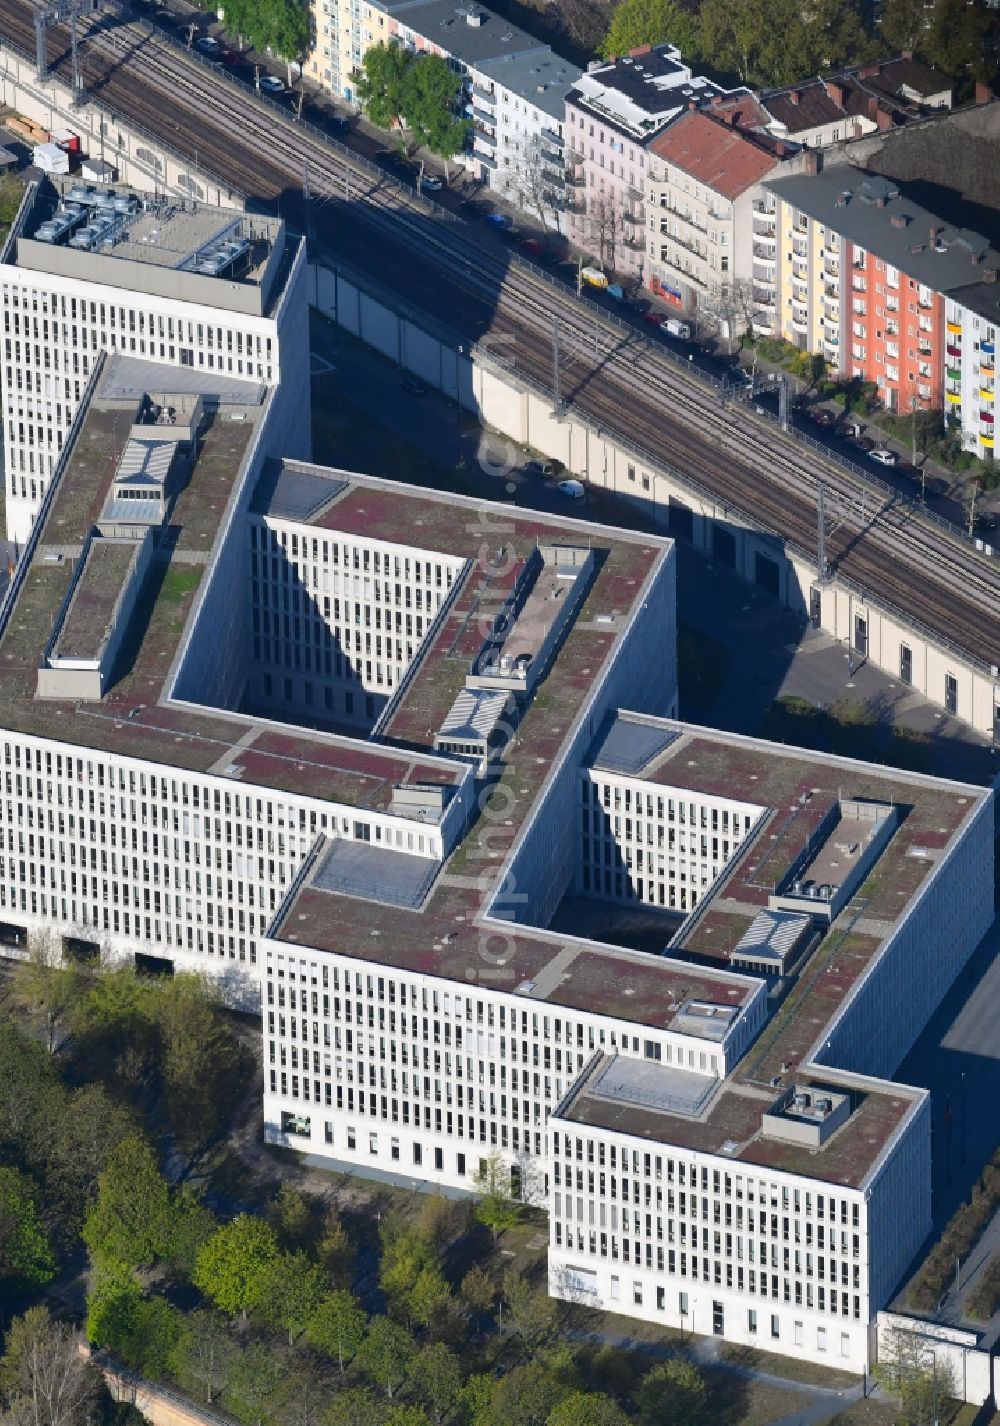 Berlin from above - Federal Ministry of the Interior / Home Office in Berlin Moabit